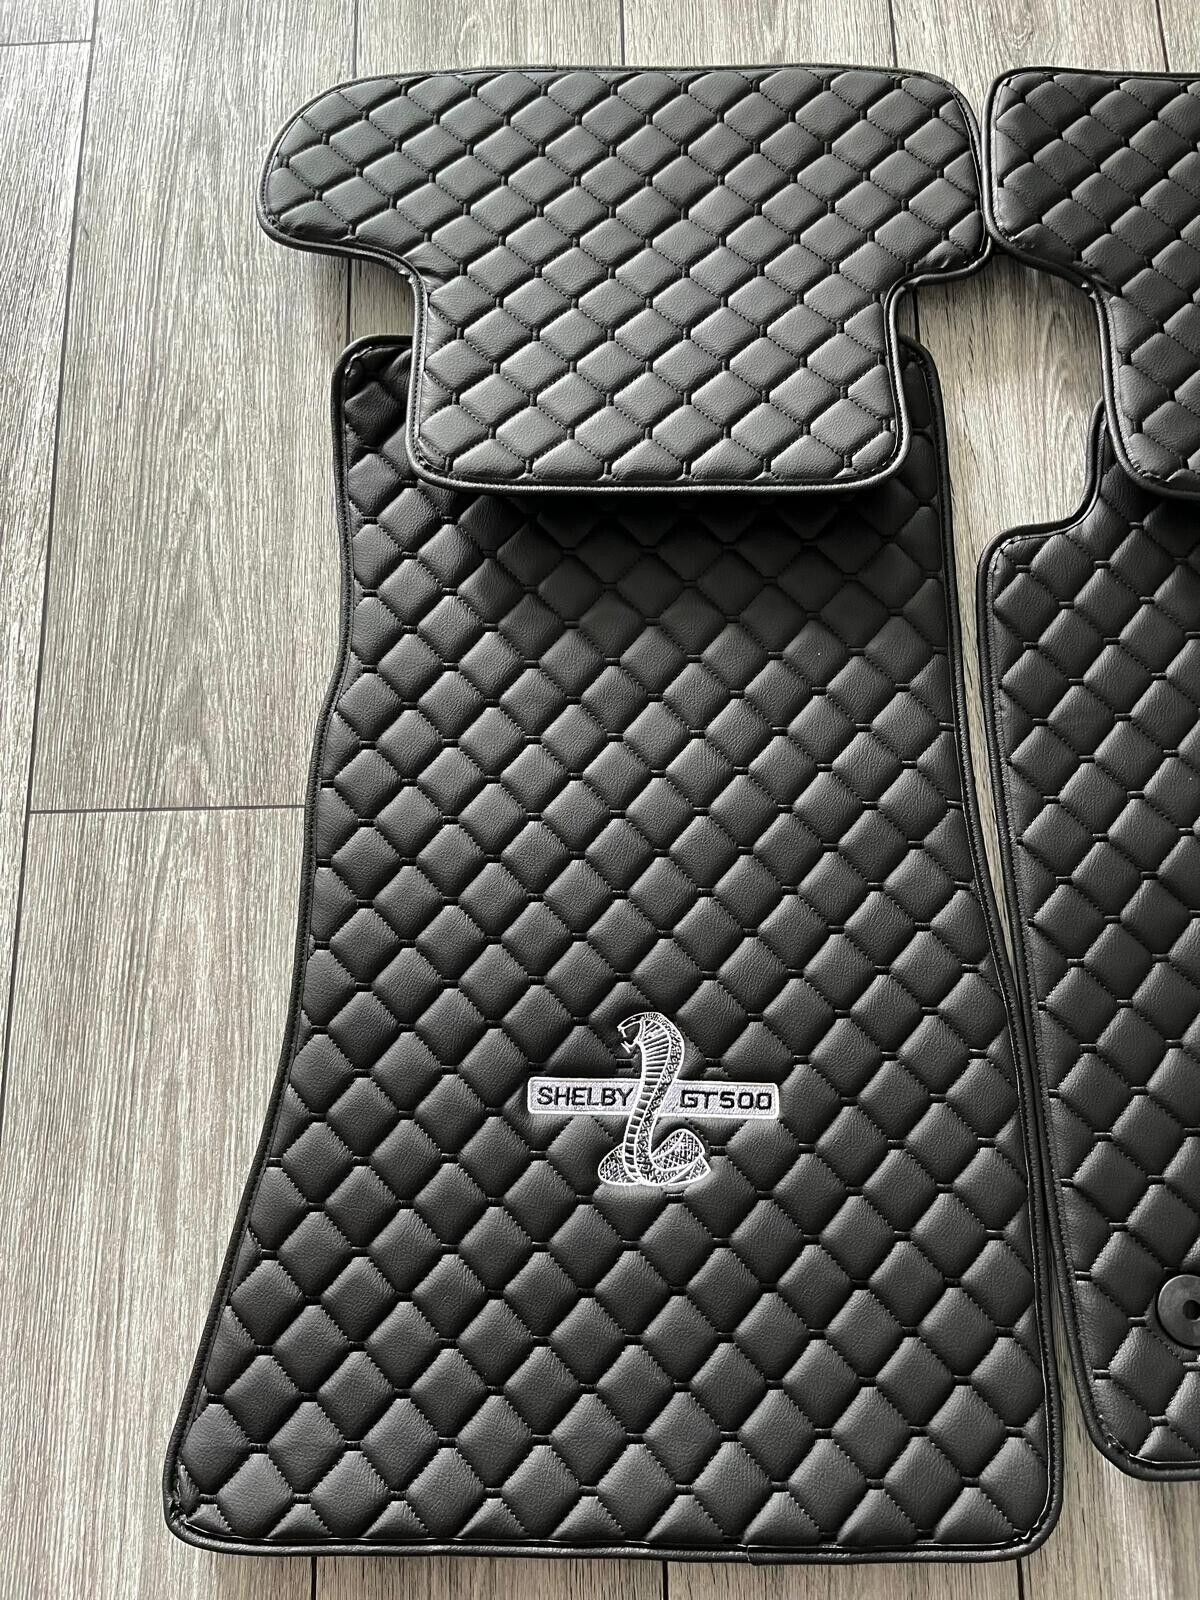 SHELBY GT500 CAR Floor Mat, Tailor Made for Your Vehicle, SHELBY Floor Mats, A++